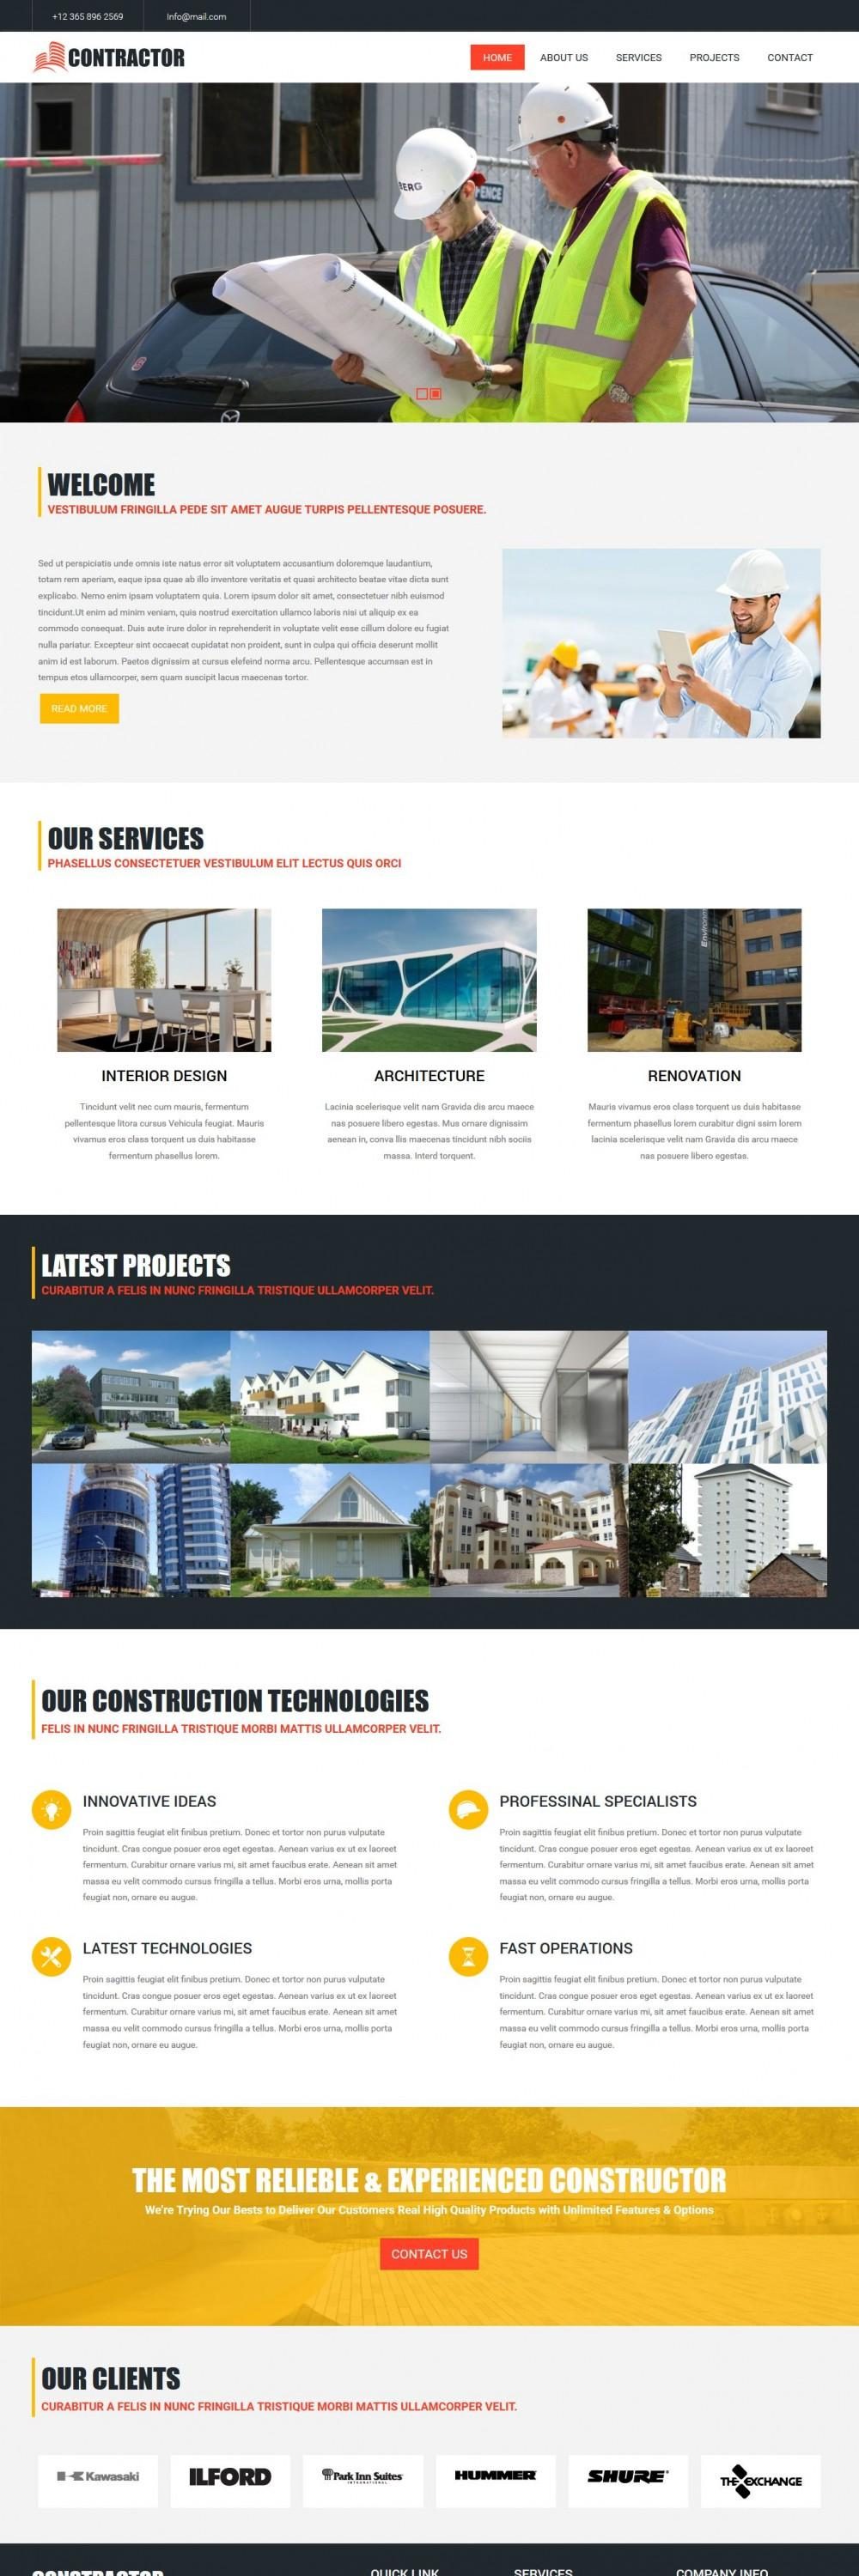 Contractor - Amazing Joomla Template for Construction Business